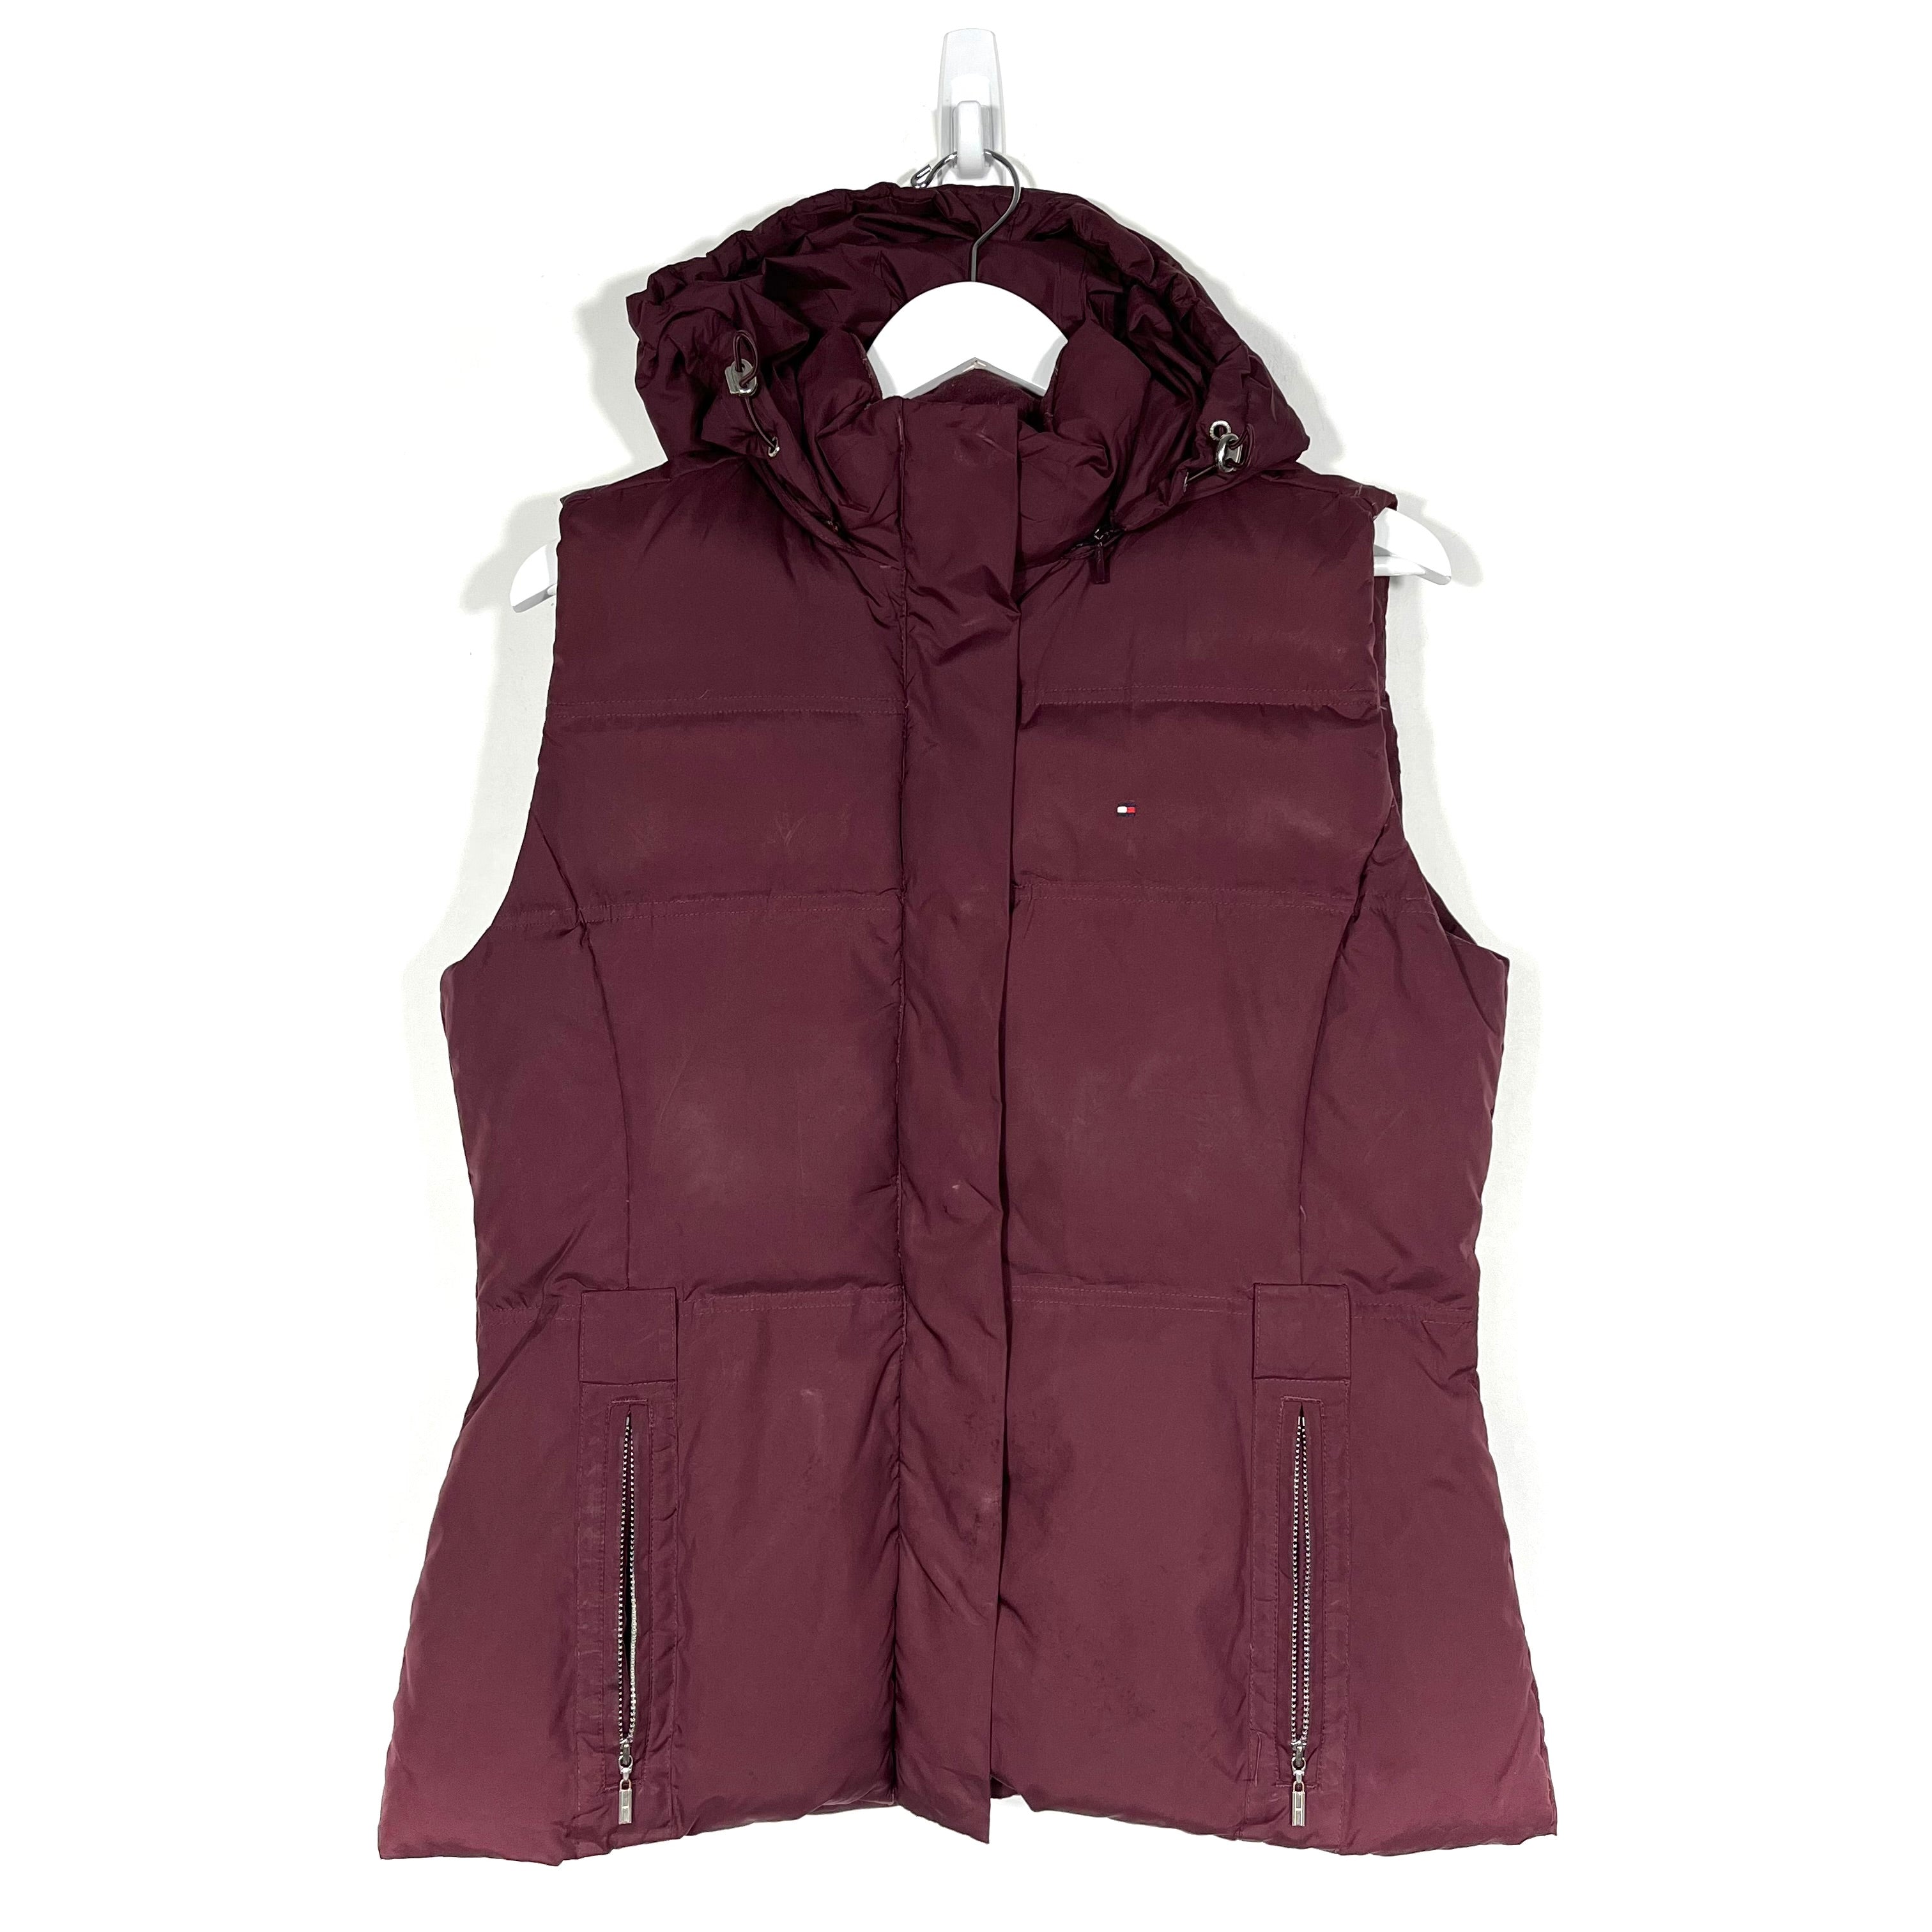 Tommy Hilfiger Hooded Insulated Vest - Women's Large